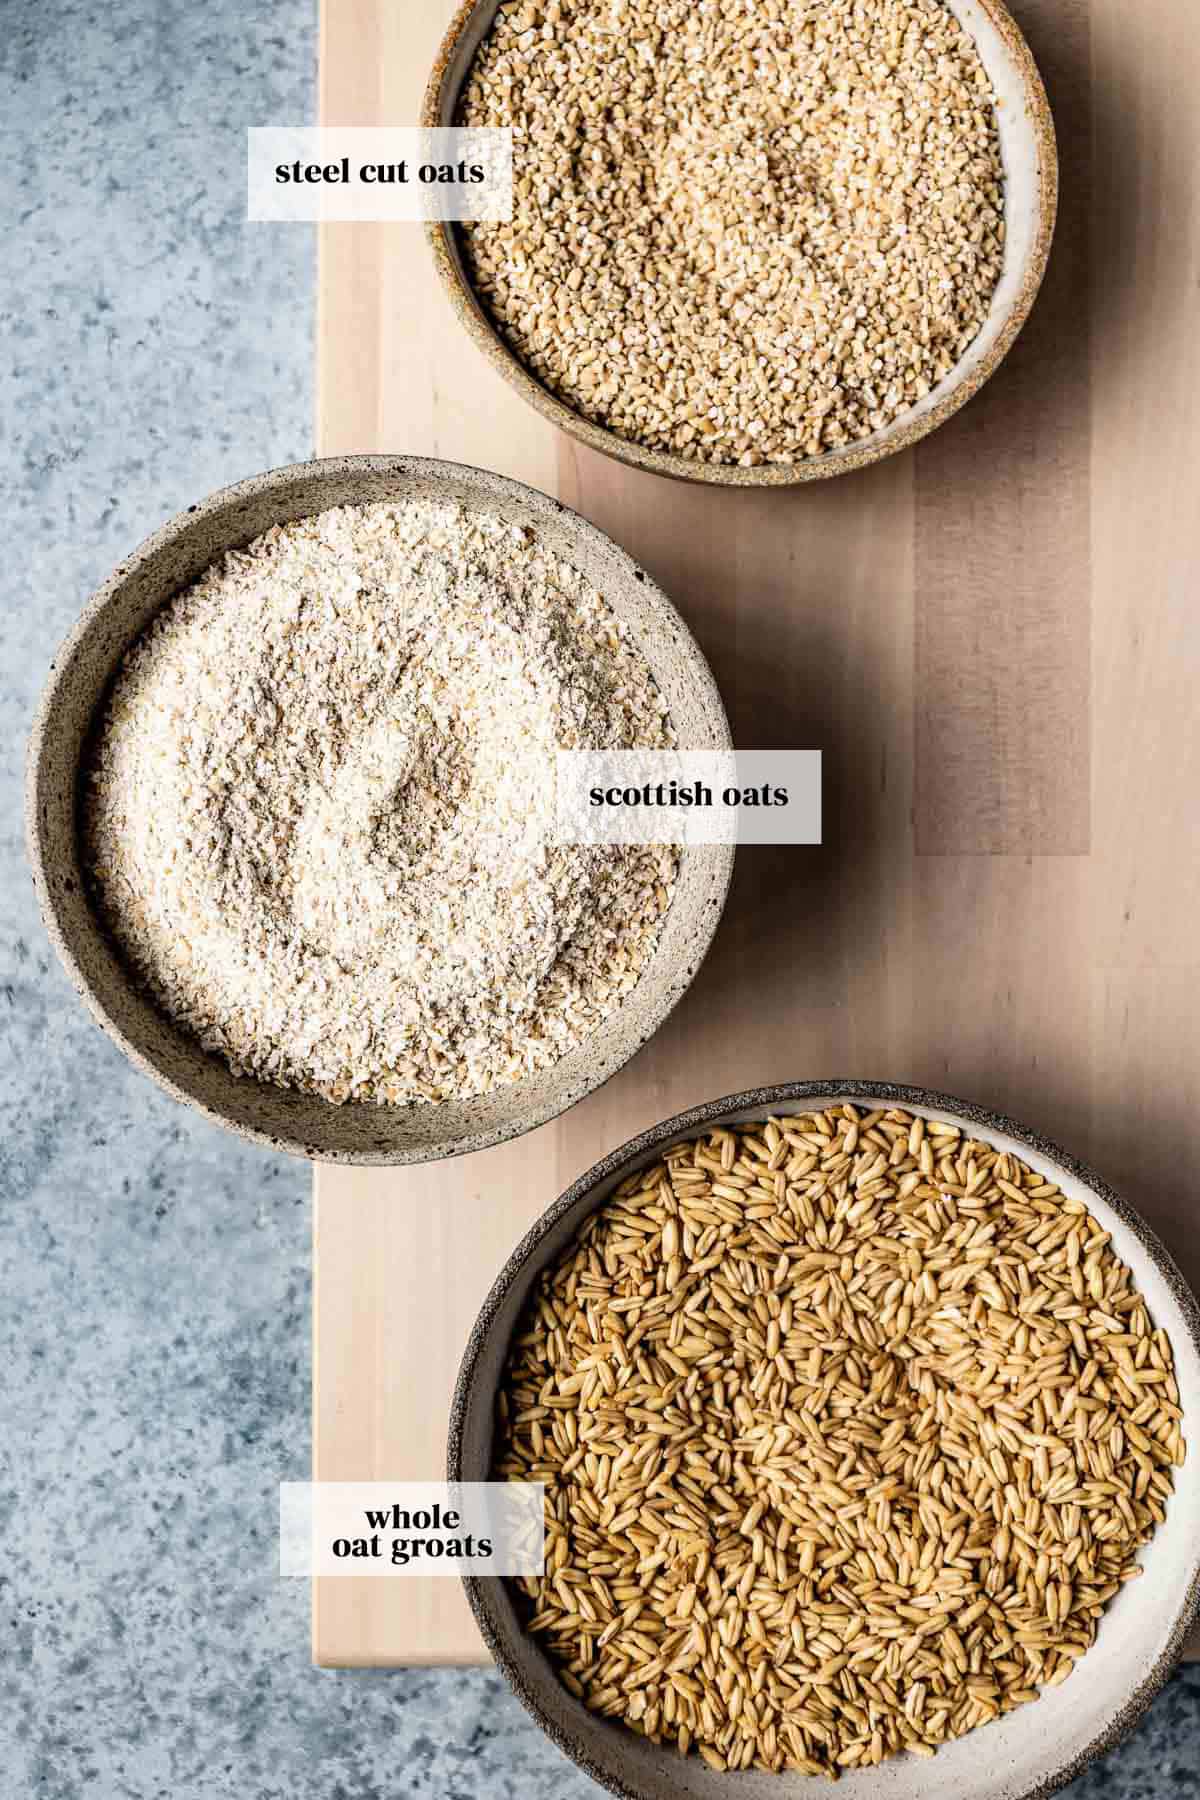 Different kinds of oats (steel cut oats, Scottish oats, and Whole oat groats) are in bowls from the top view.